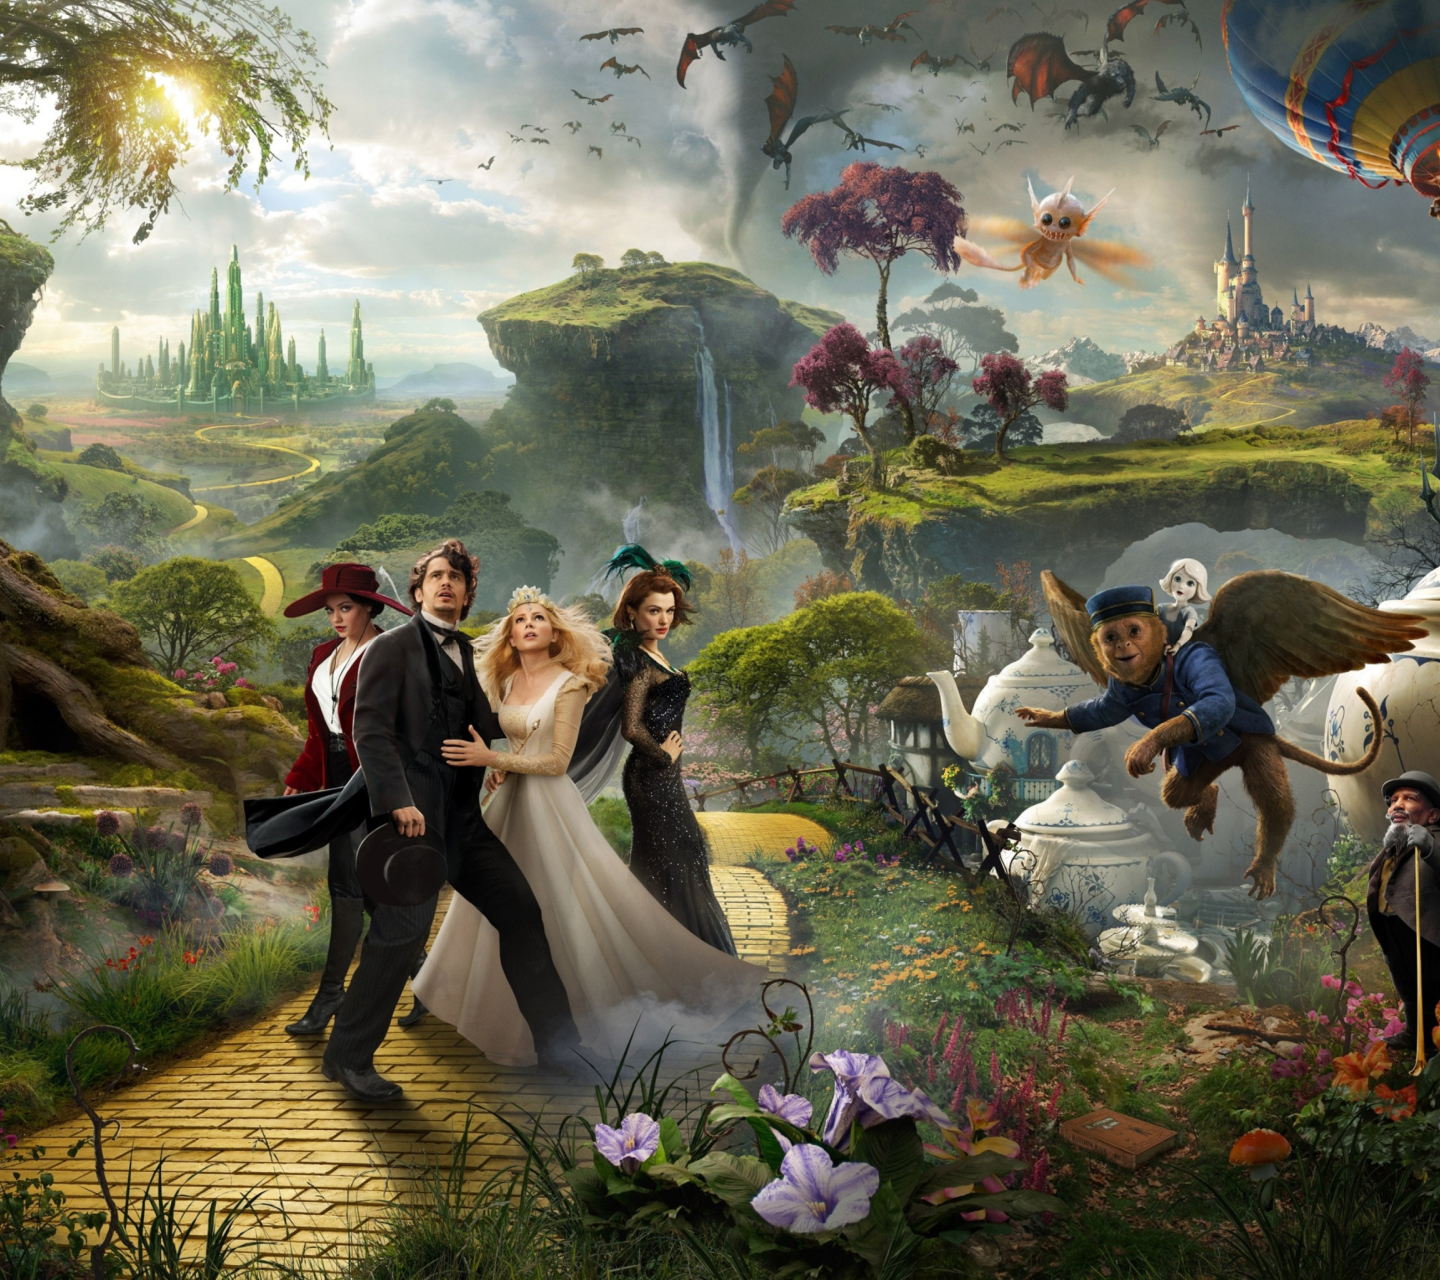 Oz The Great And Powerful 2013 Movie wallpaper 1440x1280